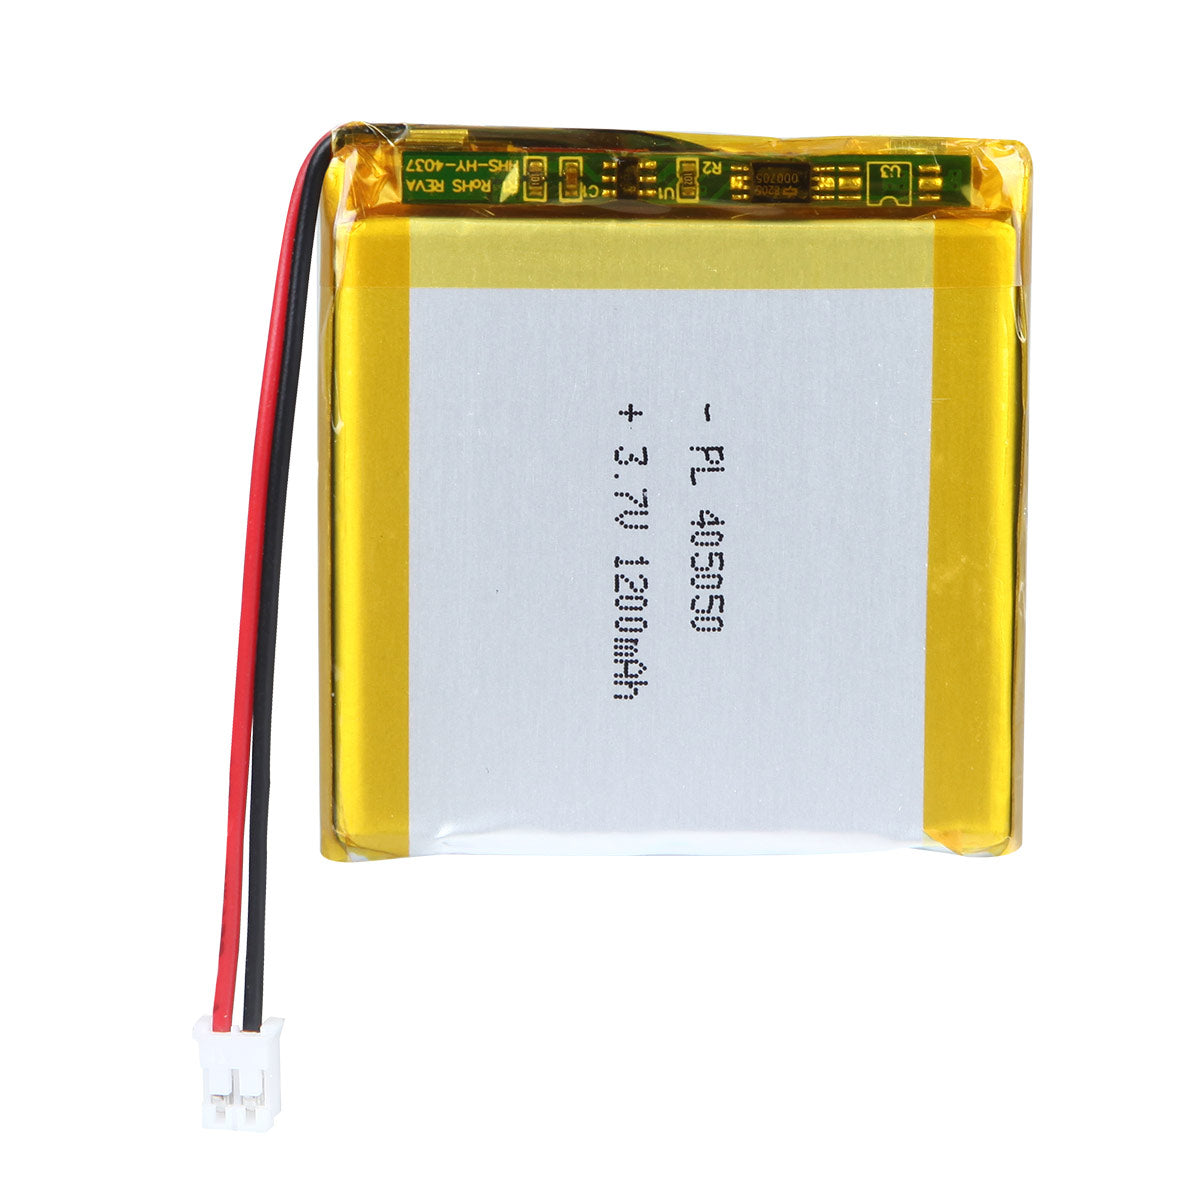 YDL 3.7V 1200mAh 405050 Rechargeable Lipo Battery with JST Connector - YDL Battery